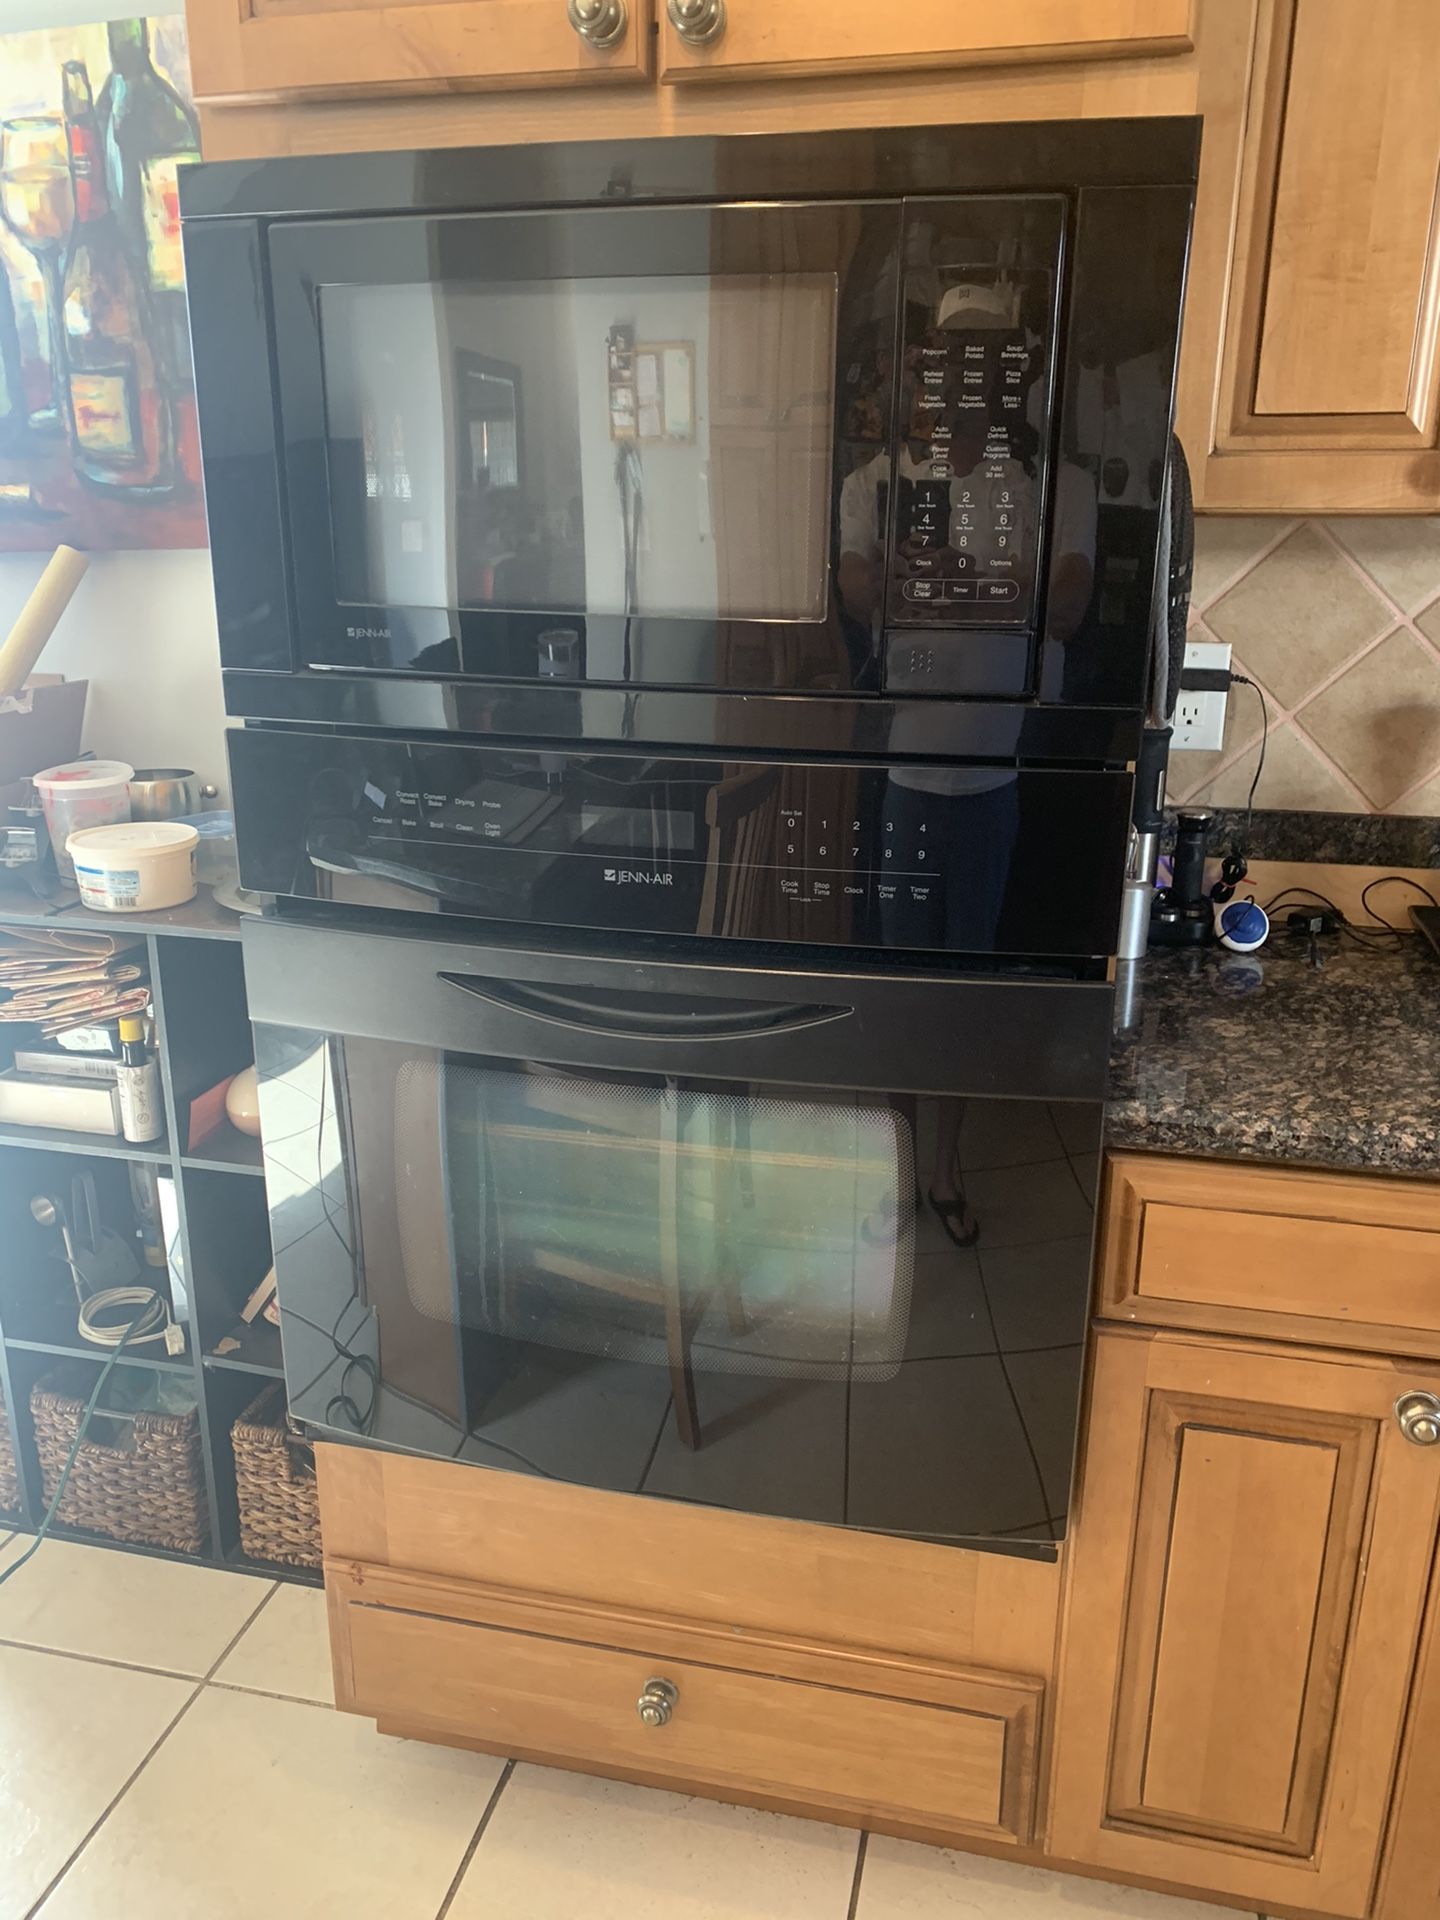 Stove microwave one piece combo motherboard for the stove is fried microwave works perfect free